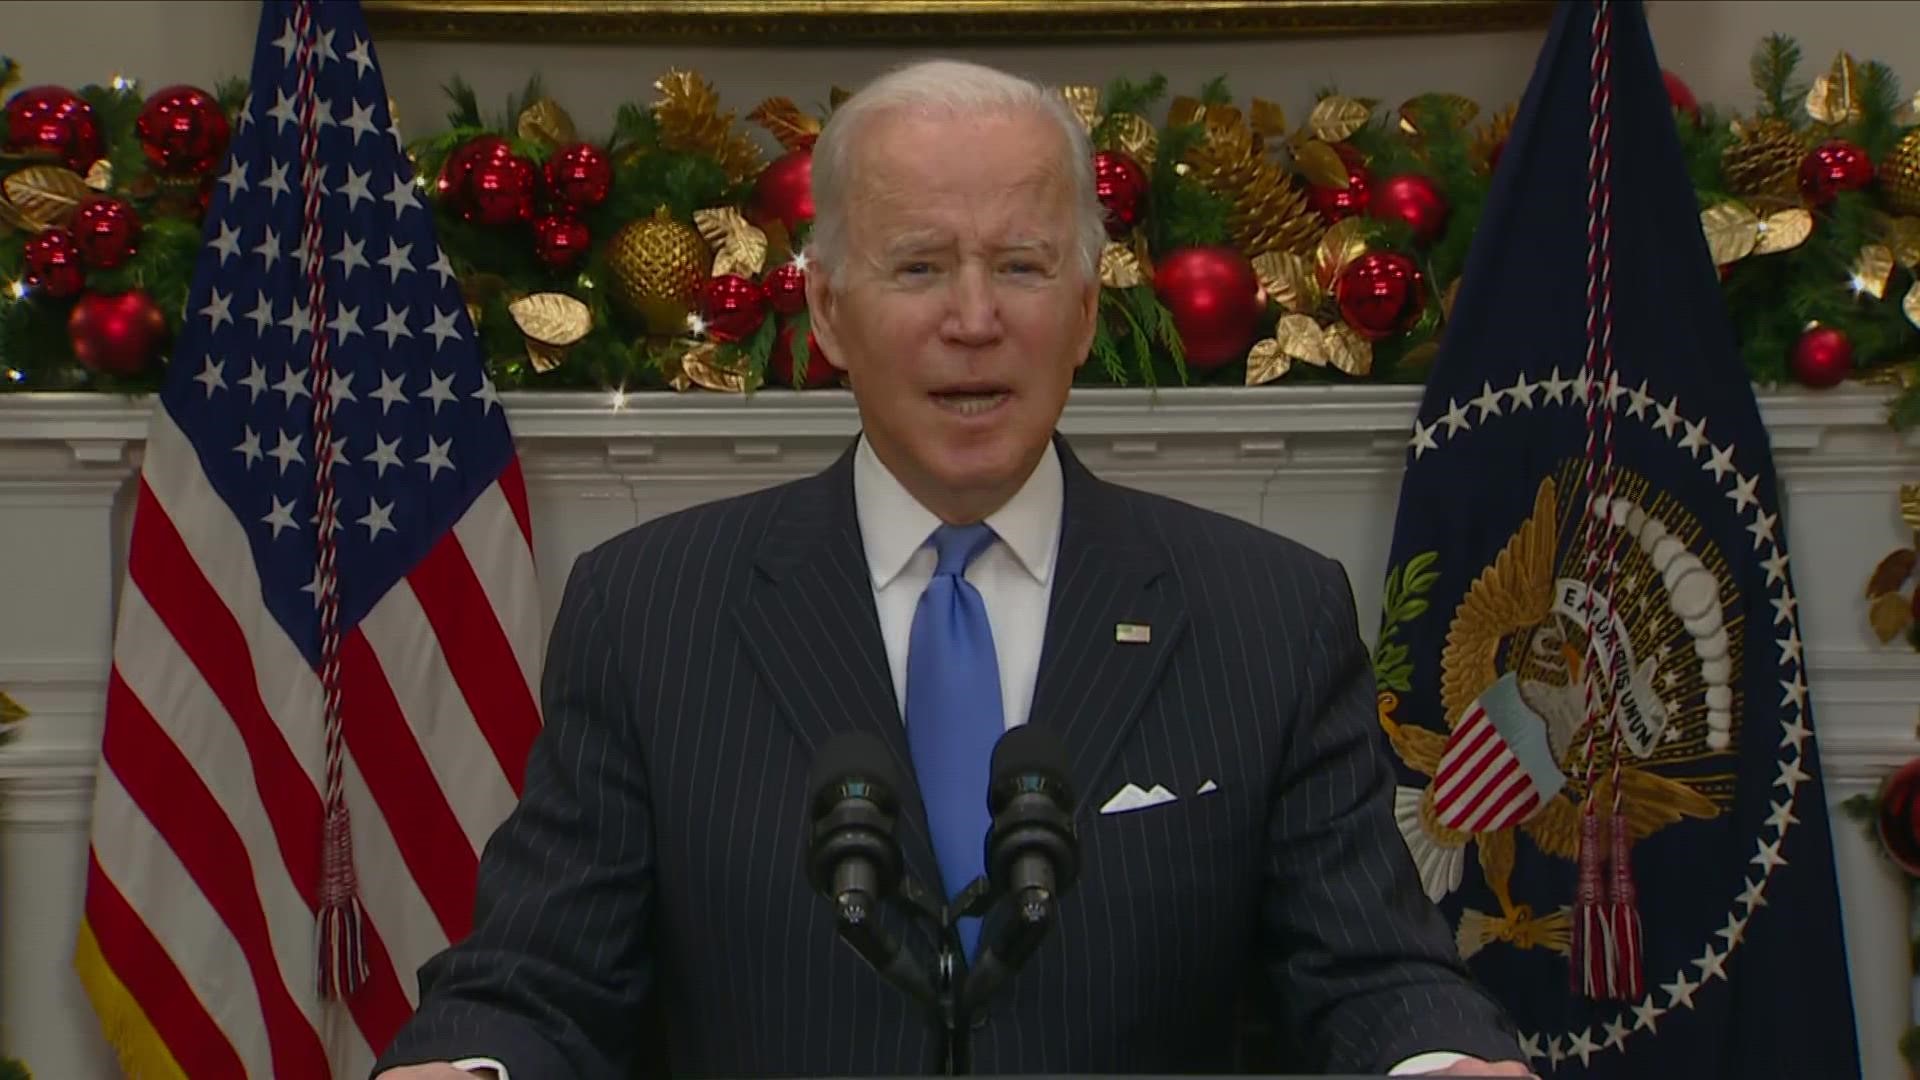 President Joe Biden urged Americans to get vaccinated, including booster shots, to combat concerns over the COVID-19 variant named omicron.